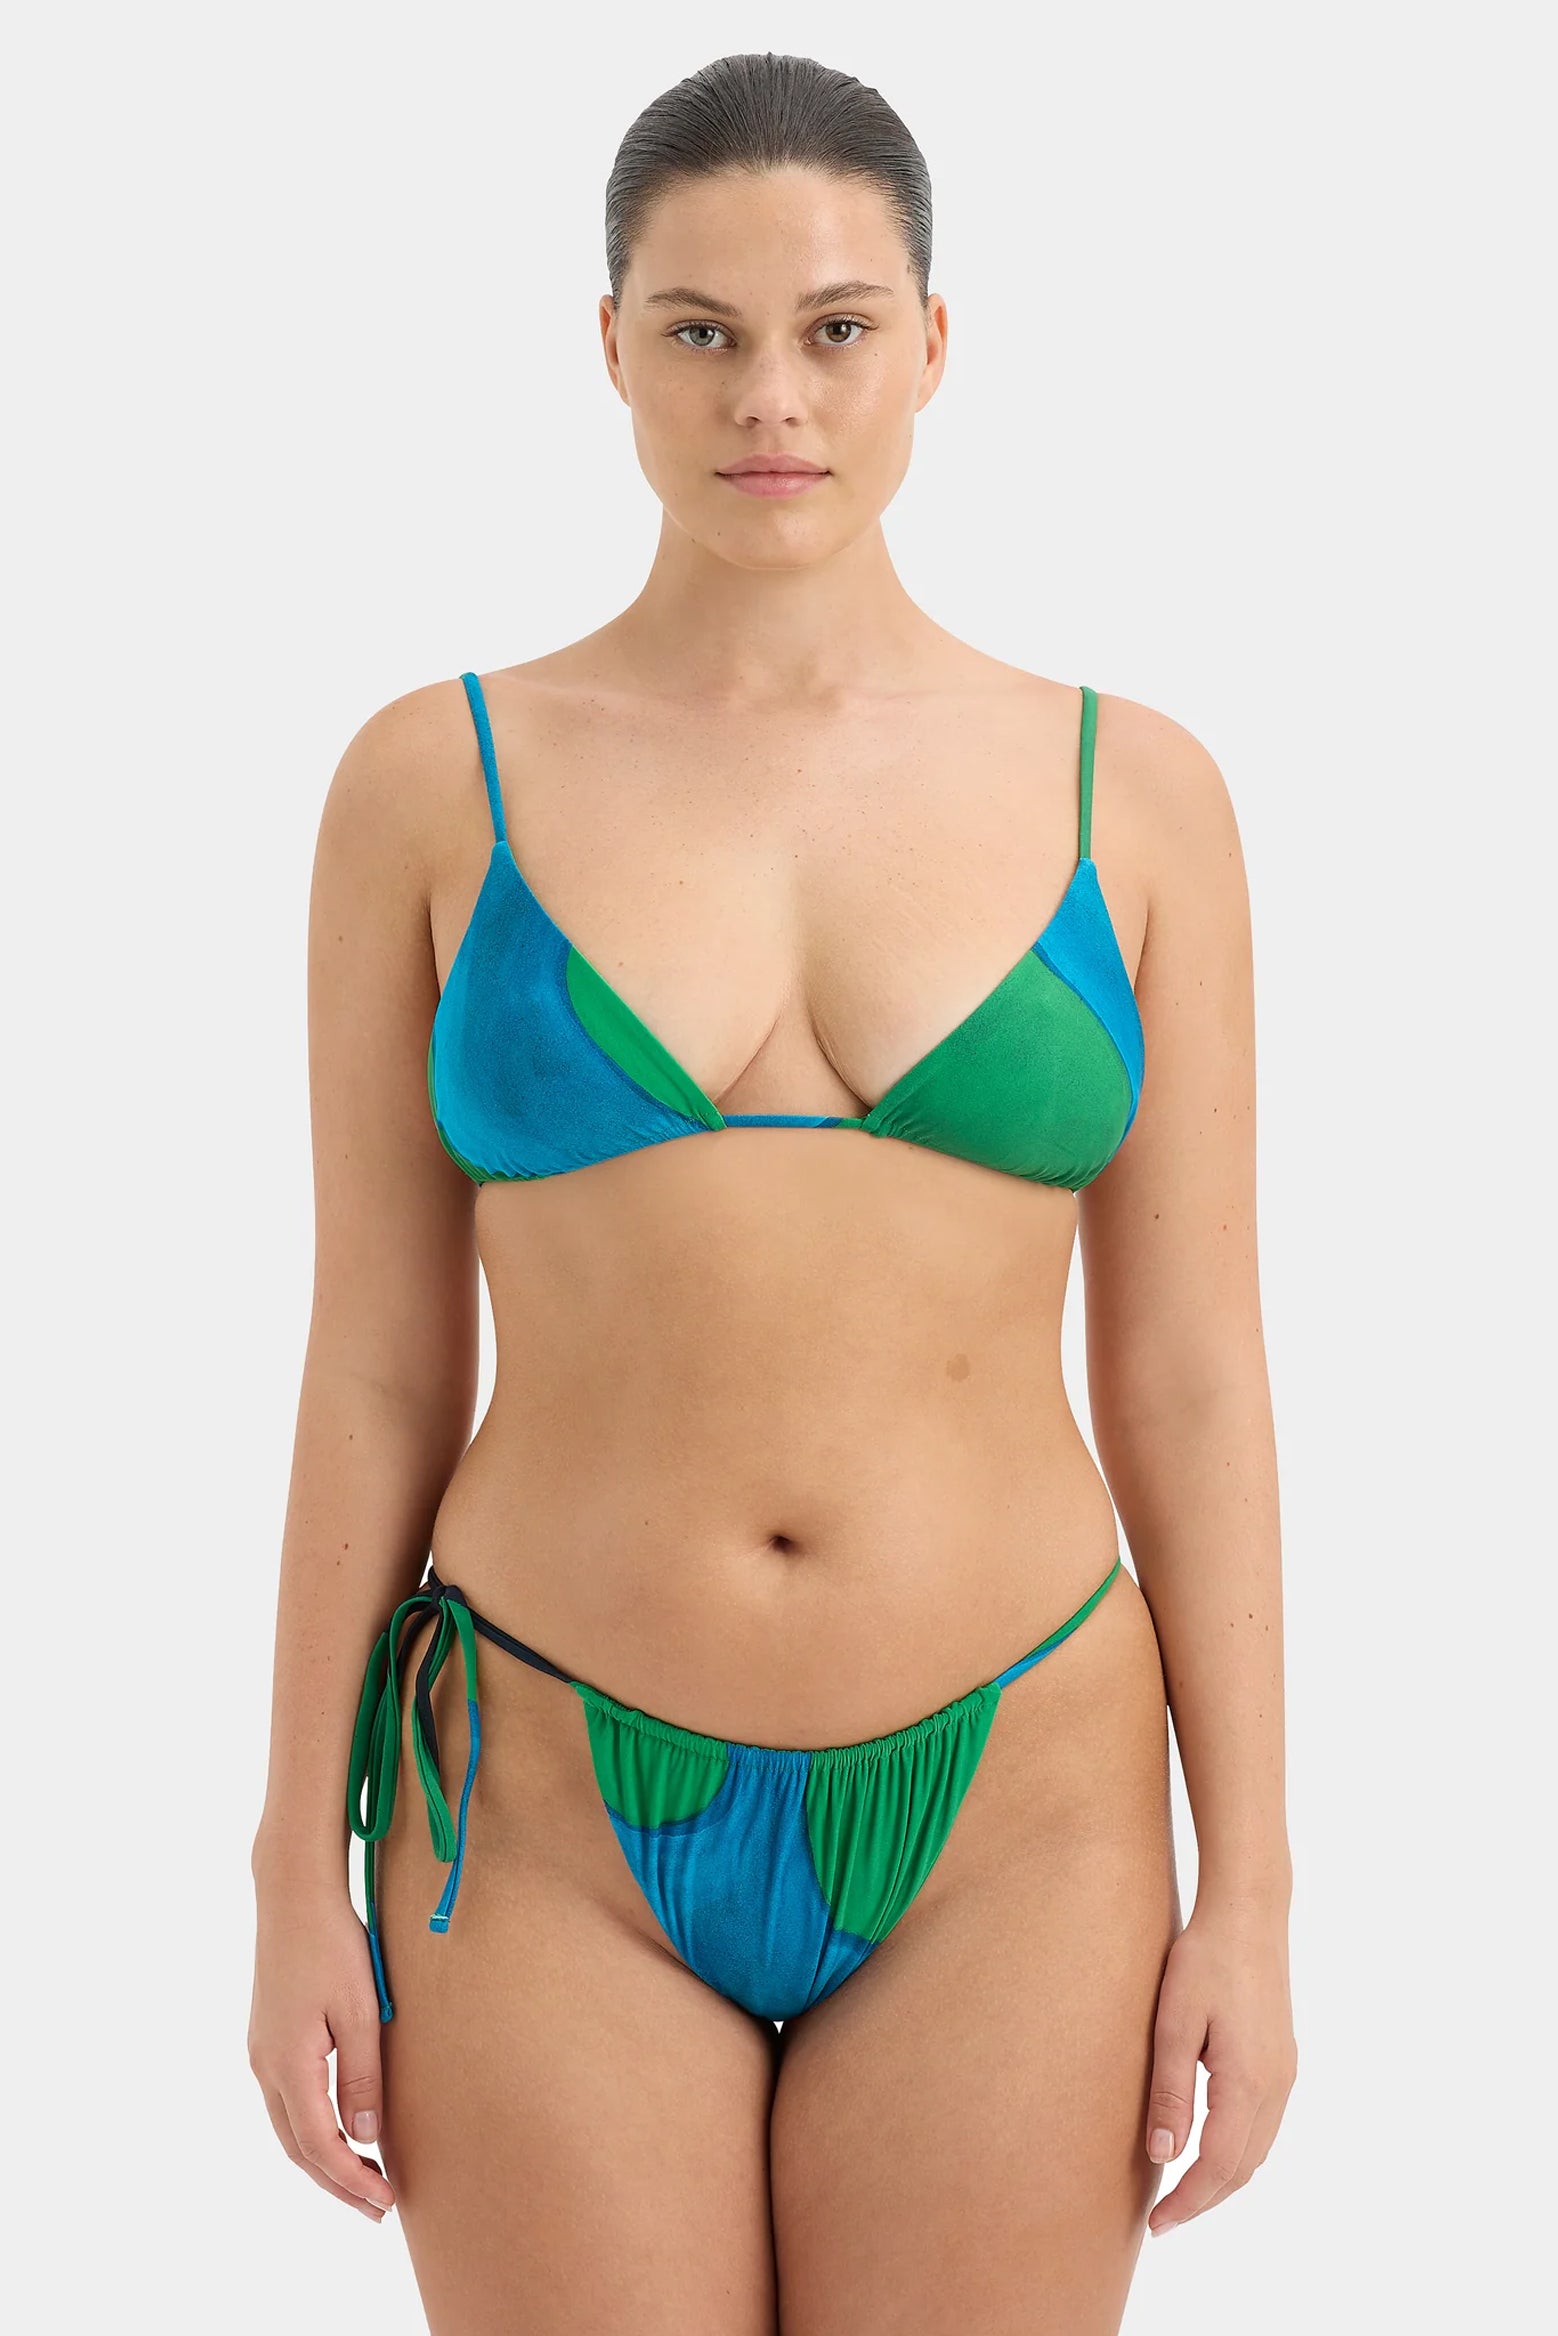 SIR Francesca String Triangle Top in Emerald available at The New Trend Australia.